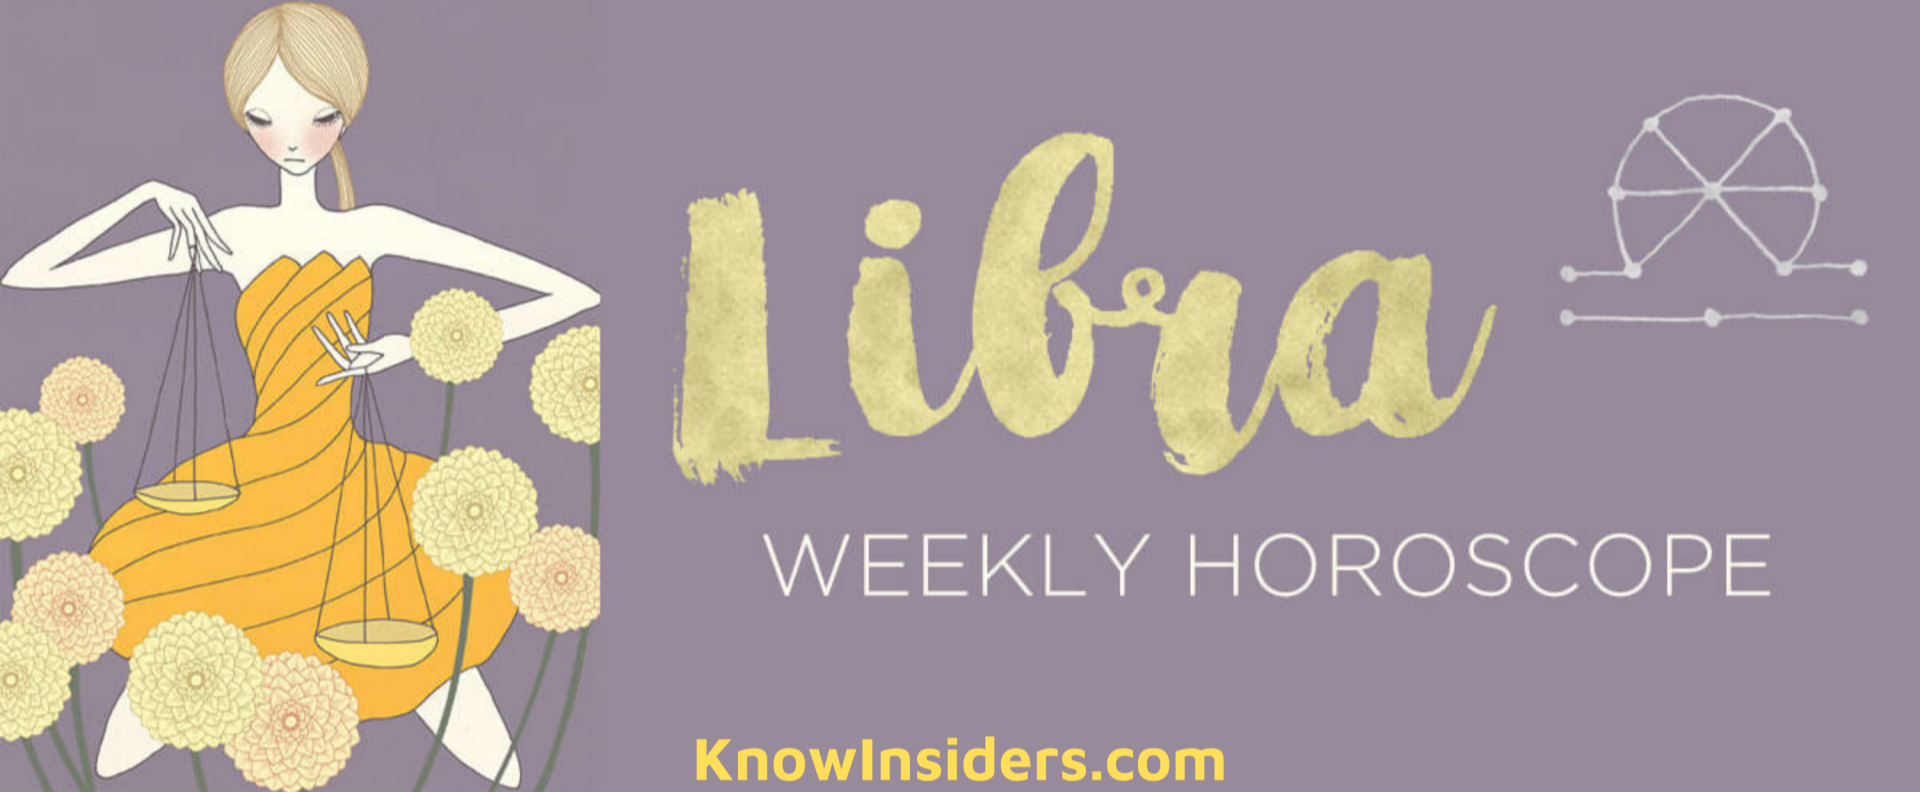 LIBRA Weekly Horoscope (April 26 - May 2): Astrological Predictions for Love, Financial, Career and Health